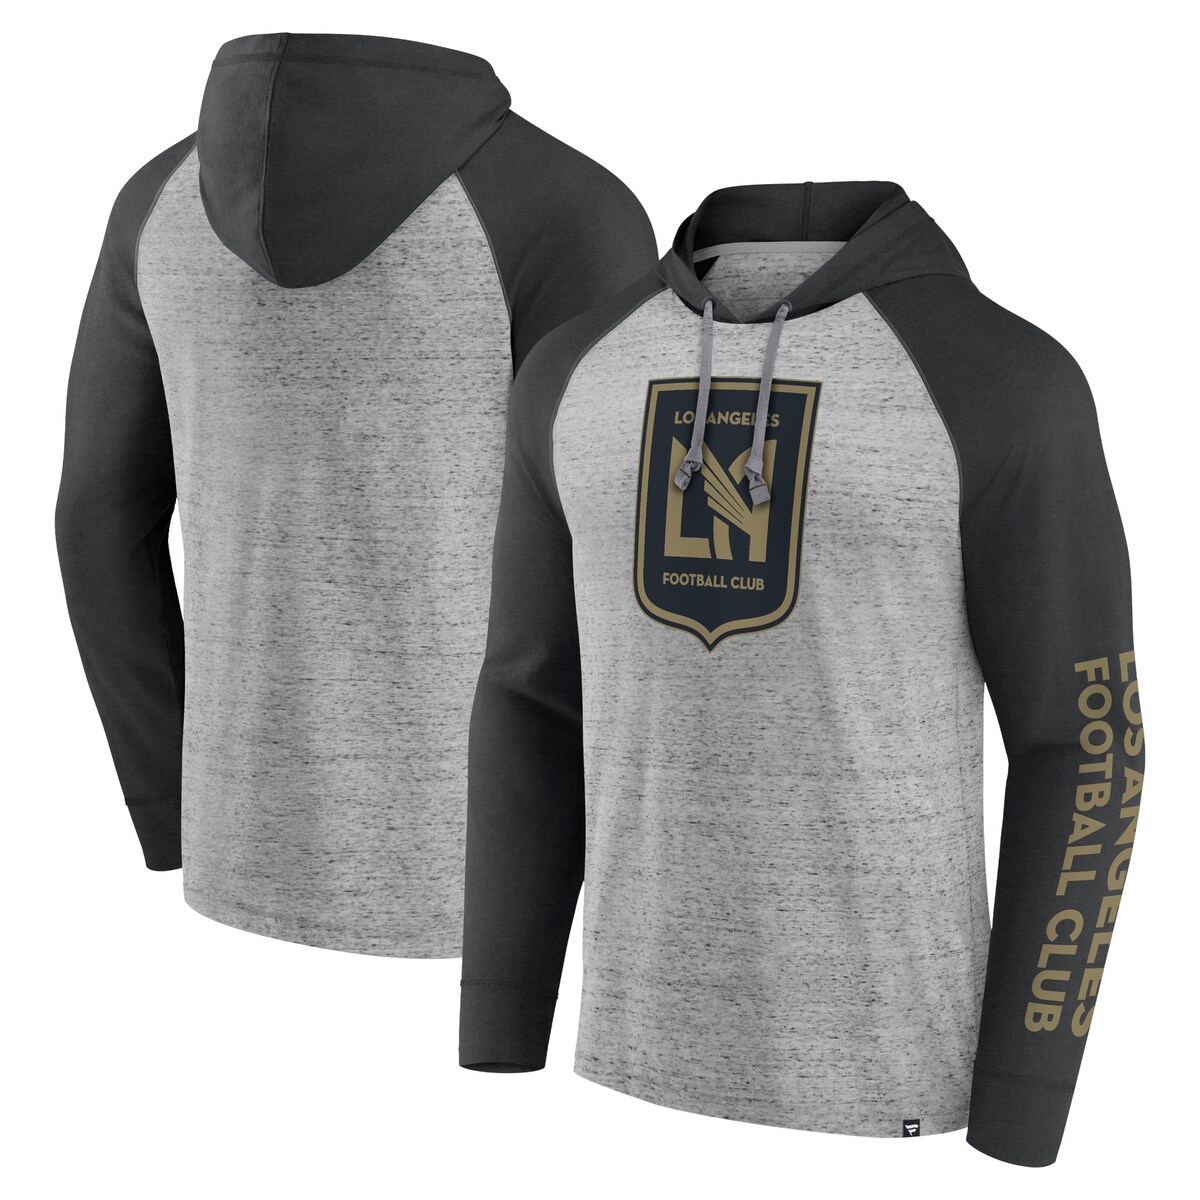 Relish in LAFC style and lightweight comfort with this Deflection pullover hoodie by Fanatics Branded. Signature team colors and LAFC graphics make it easy to spot who you root for on the pitch. Raglan sleeves offer a roomier fit that increases your mobility.PulloverLong sleeveMachine wash, tumble dry lowHood with drawstringMaterial: 60% Cotton/ 40 % PolyesterImportedOfficially licensedBrand: Fanatics BrandedRaglan sleevesScreen print graphicsLightweight hoodie suitable for mild temperatures